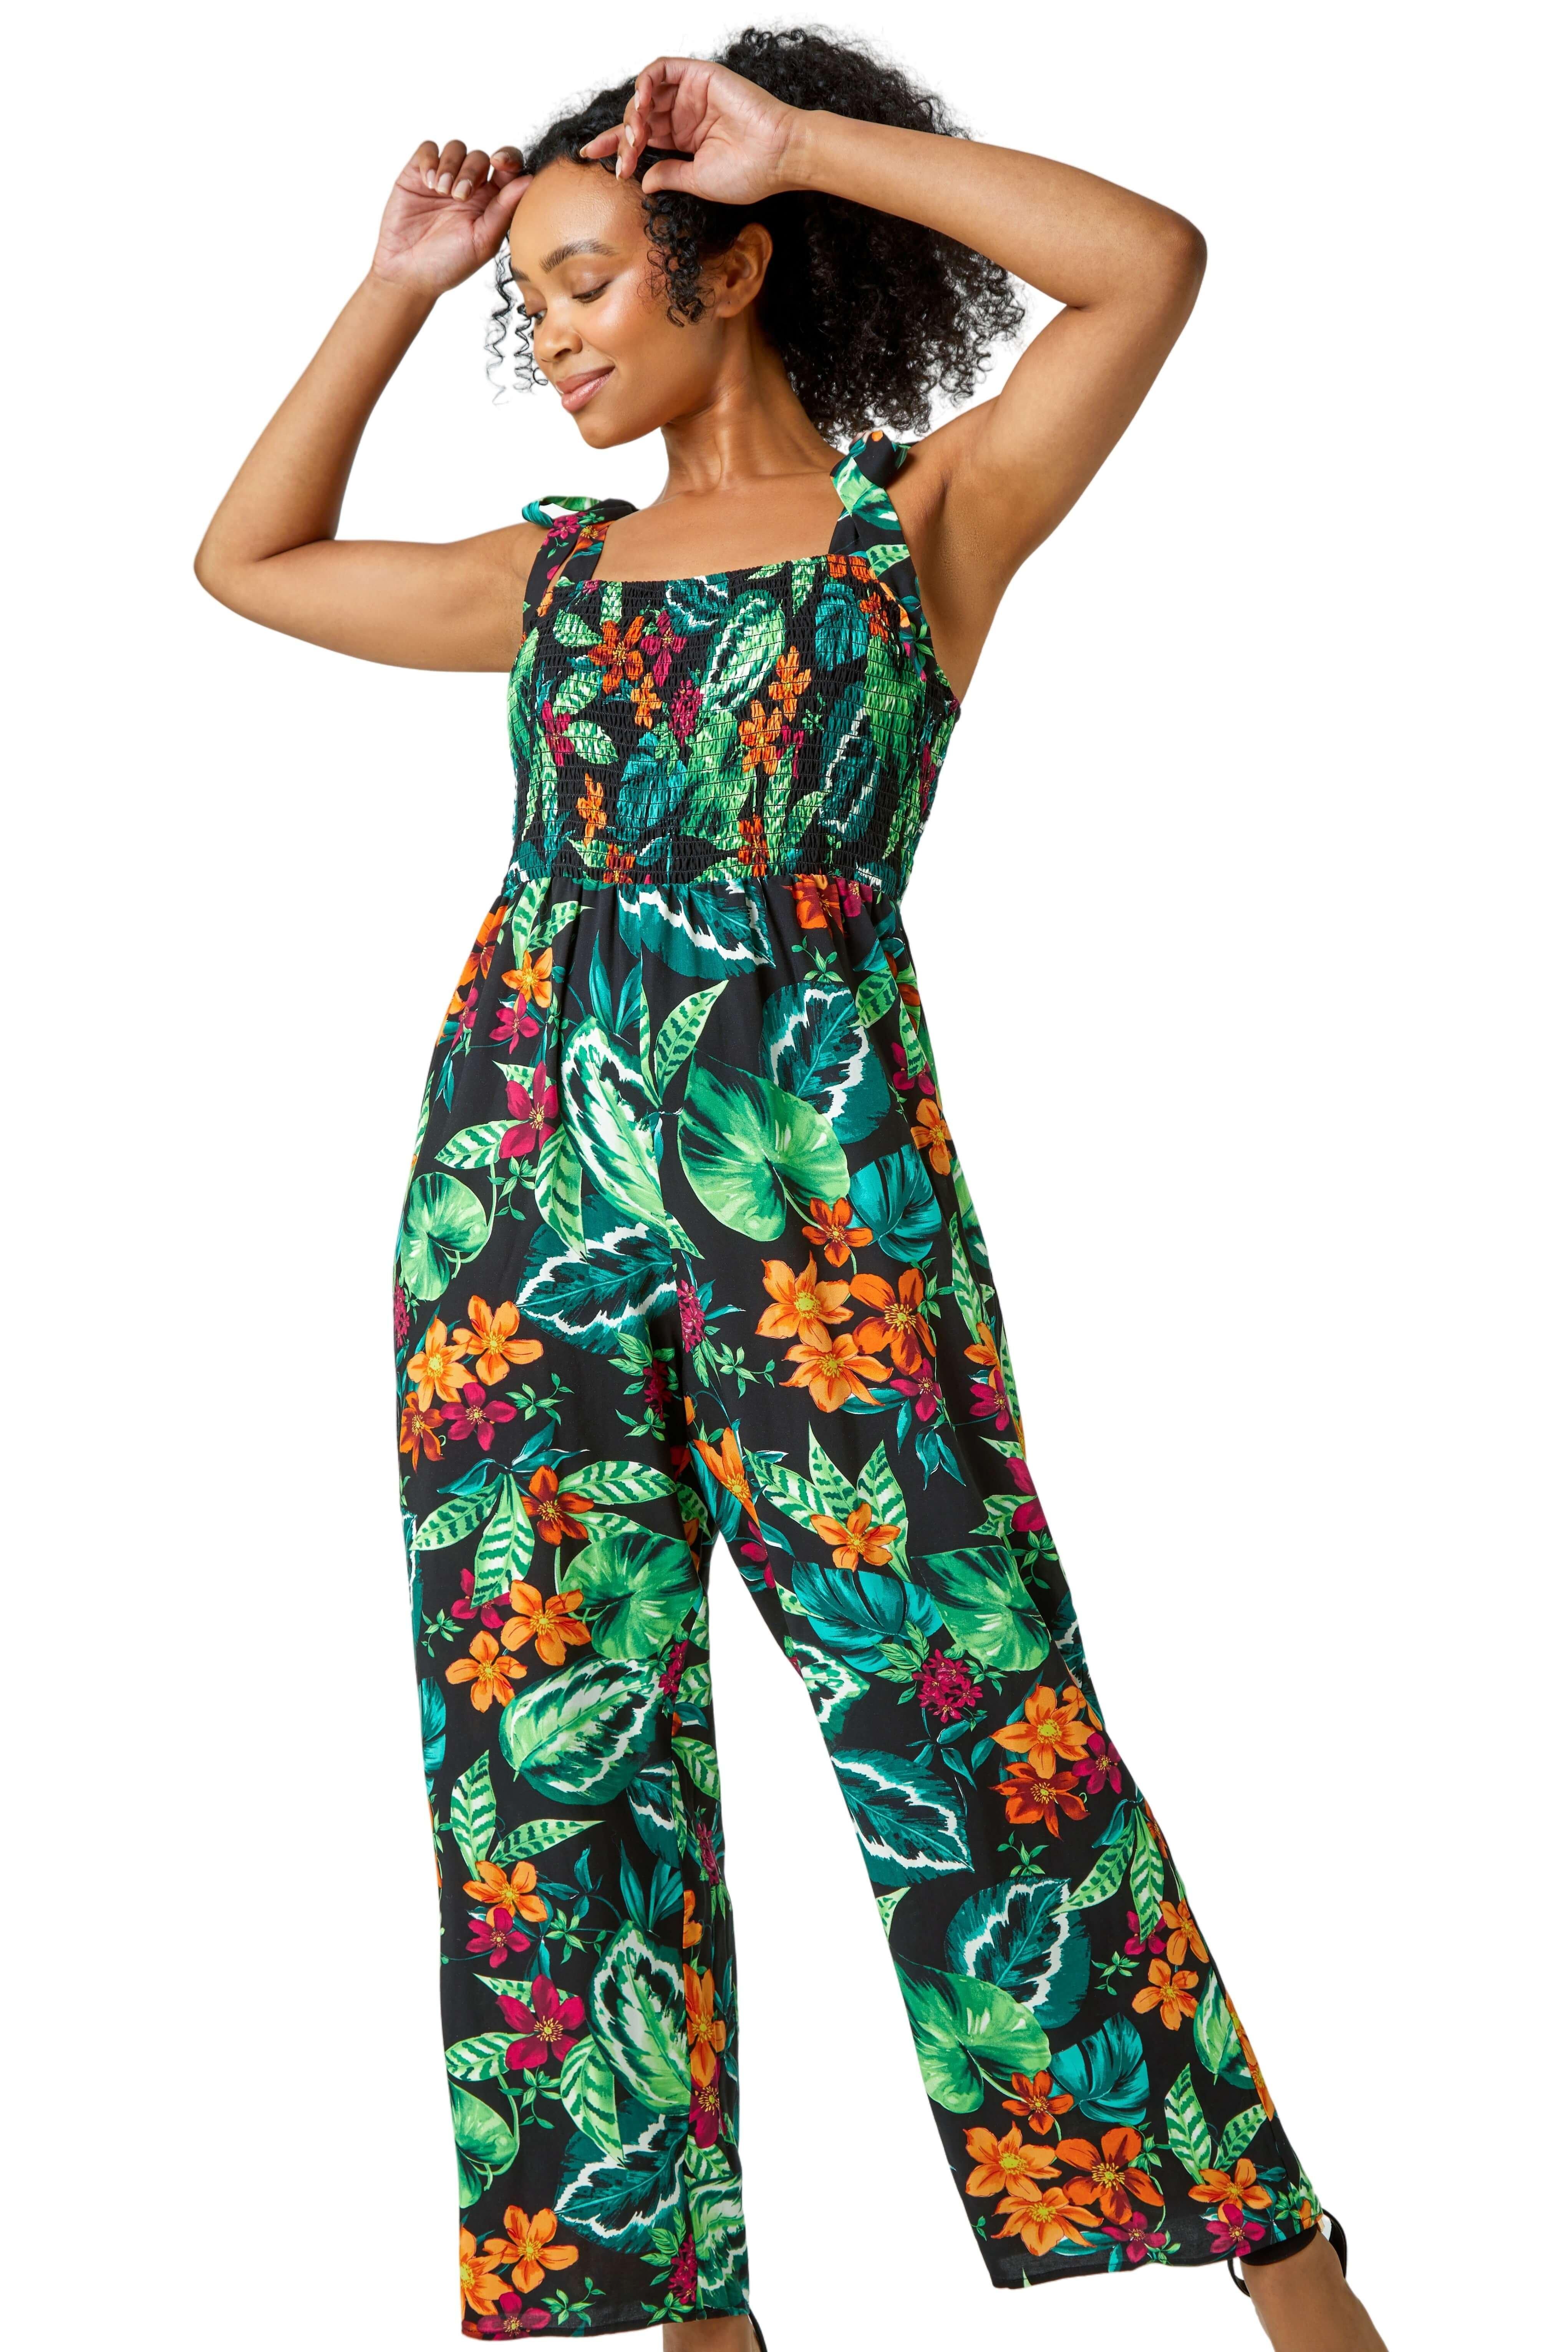 Jumpsuits | Green Floral Jumpsuit With Angel Sleeves | Yumi